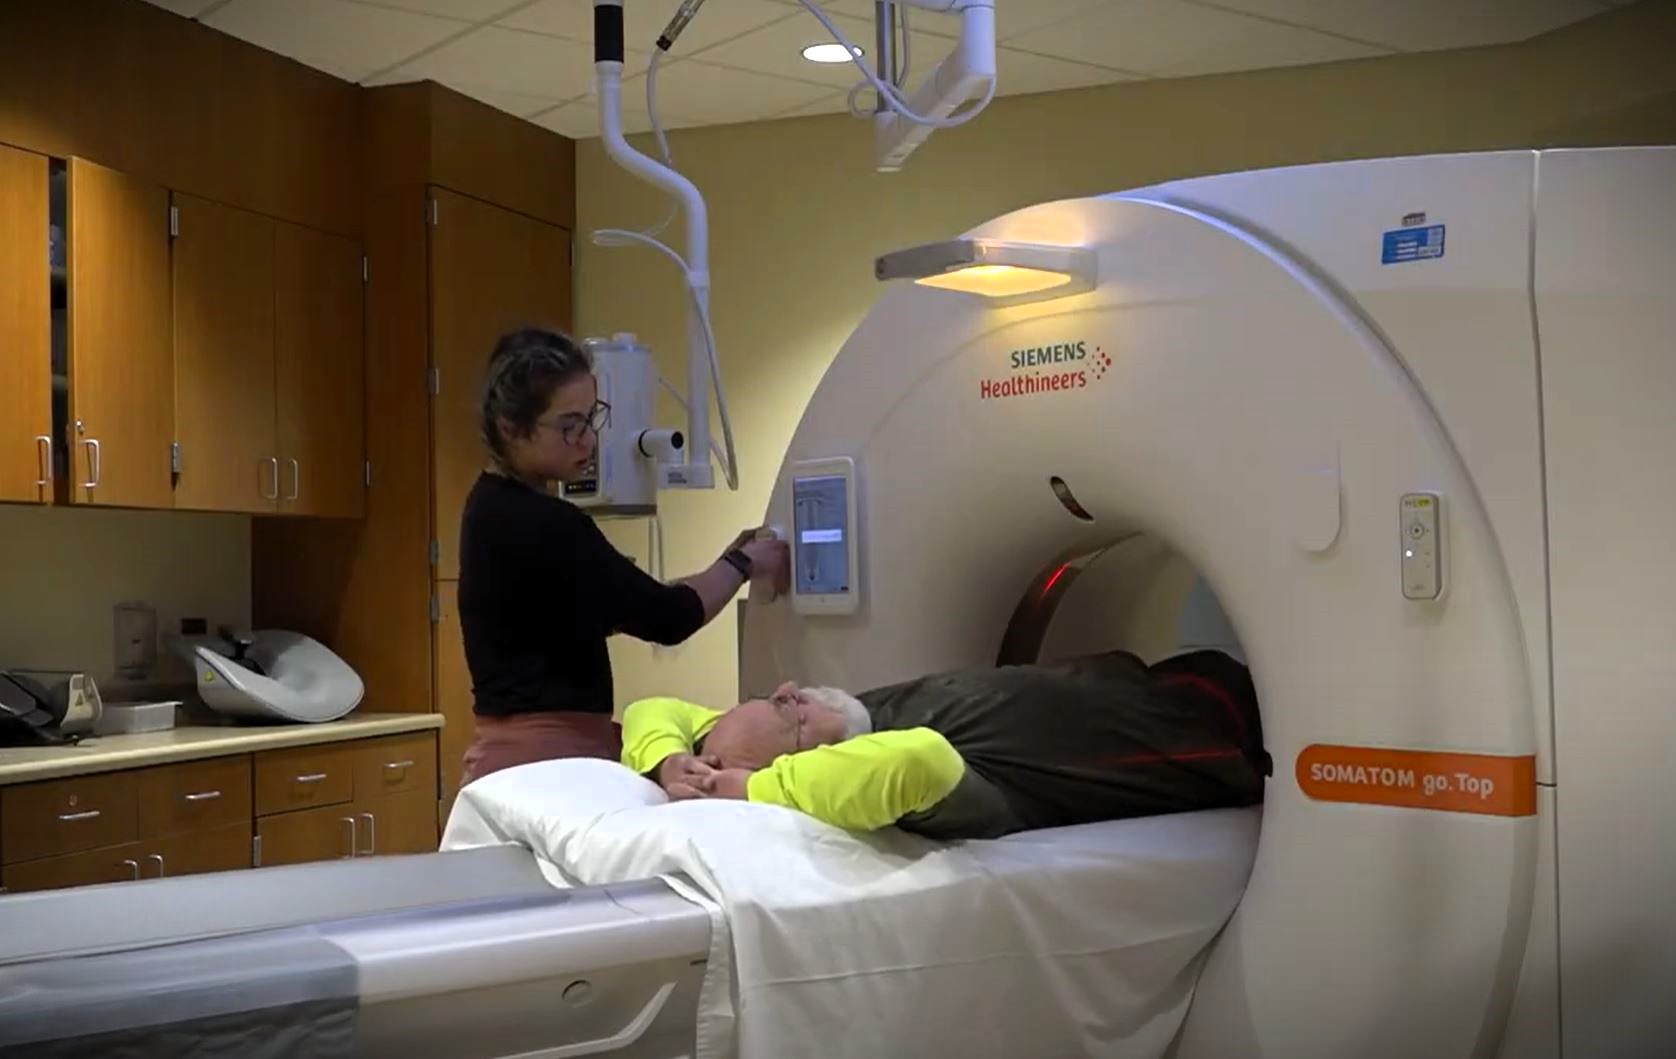 A medical technician assists an elderly patient lying on a bed as they undergo a CT scan in a hospital room. The patient is inside a Siemens Healthineers SOMATOM go.Top scanner.